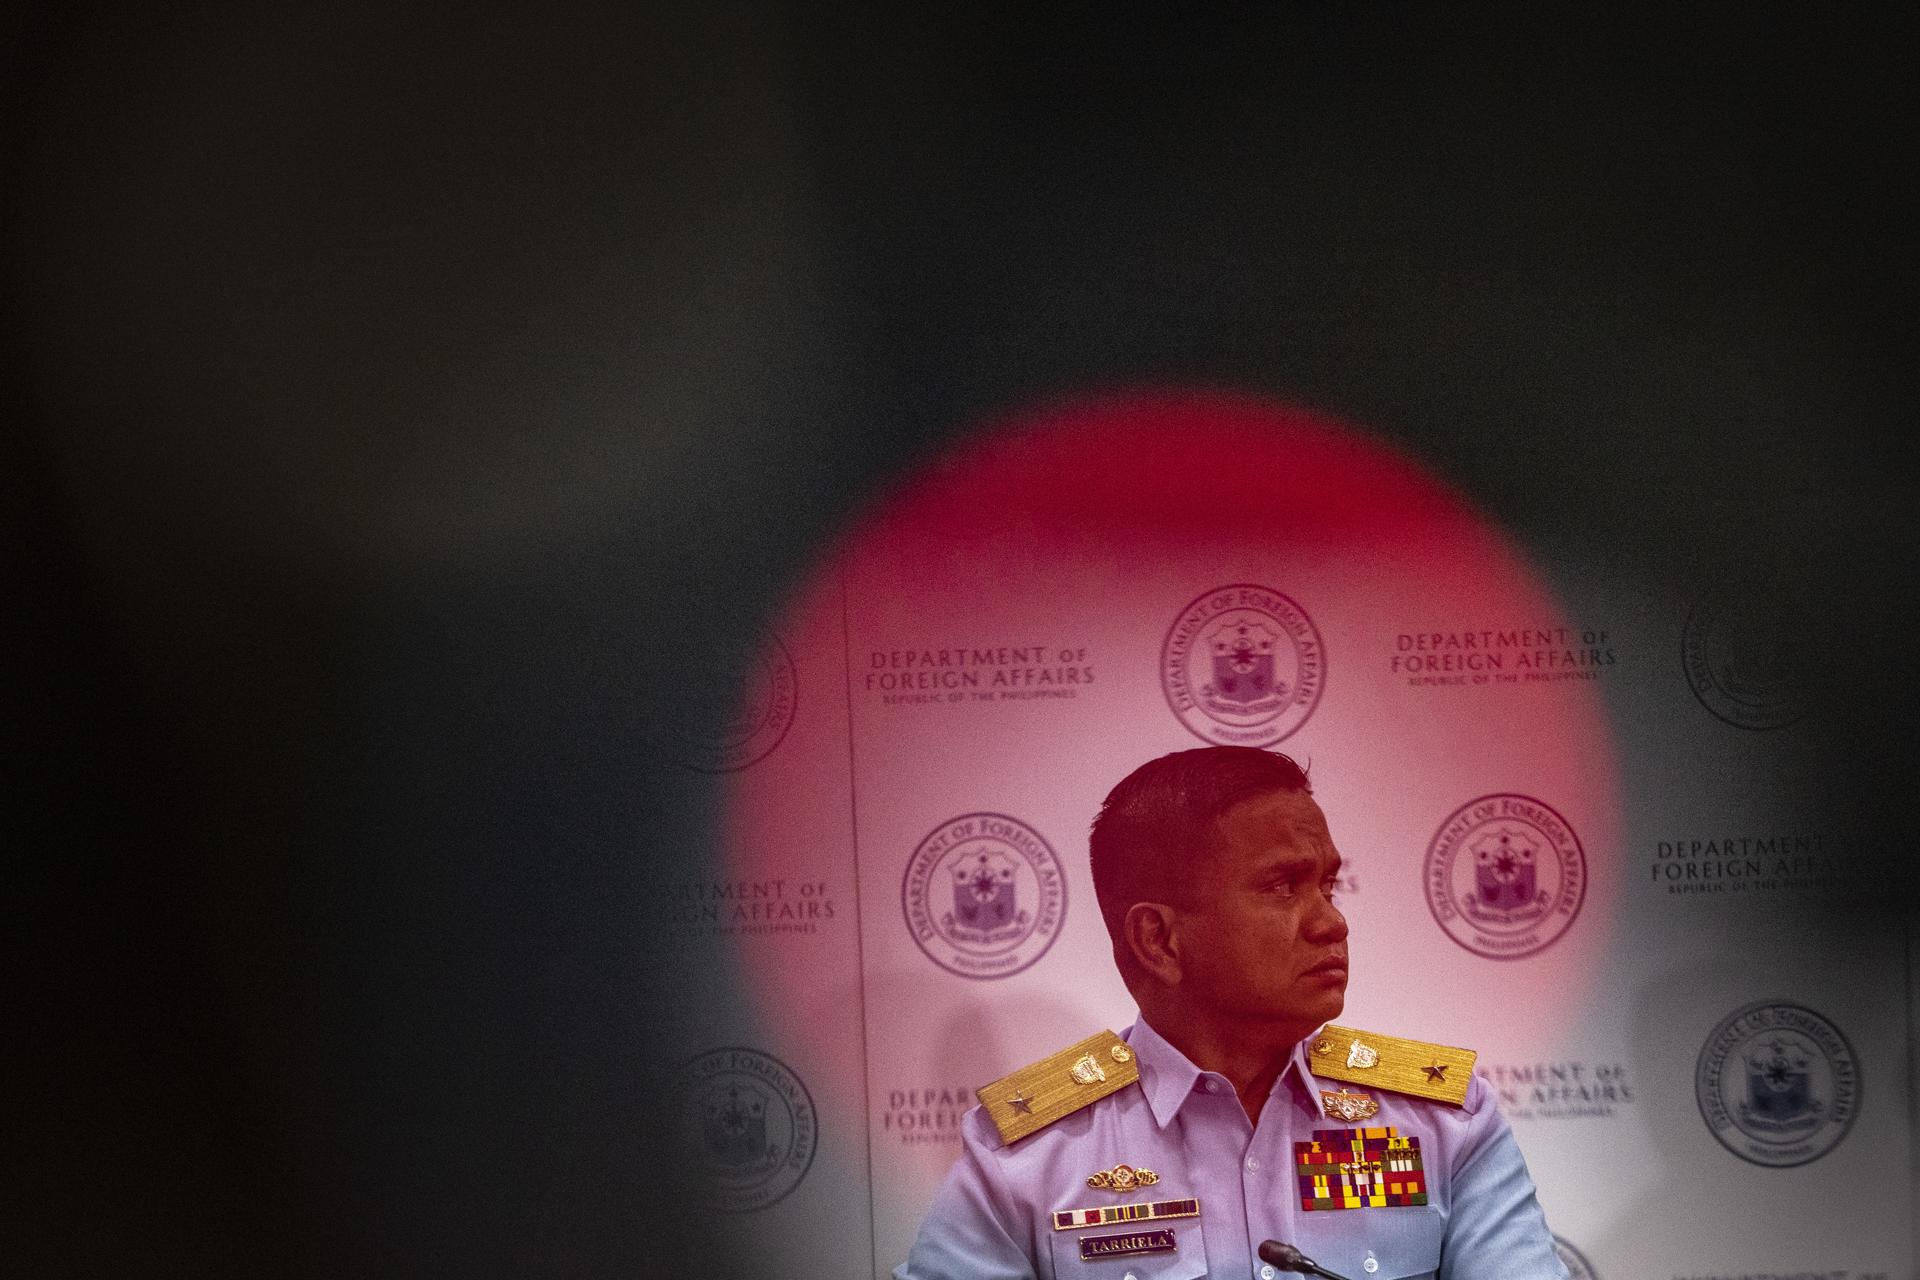 Philippine Coast Guard (PCG) Commodore Jay Tarriela, spokesperson for the West Philippine Sea, listens during a press conference at the Department of Foreign Affairs office in Manila, Philippines, 07 August 2023. EFE-EPA/EZRA ACAYAN / POOL